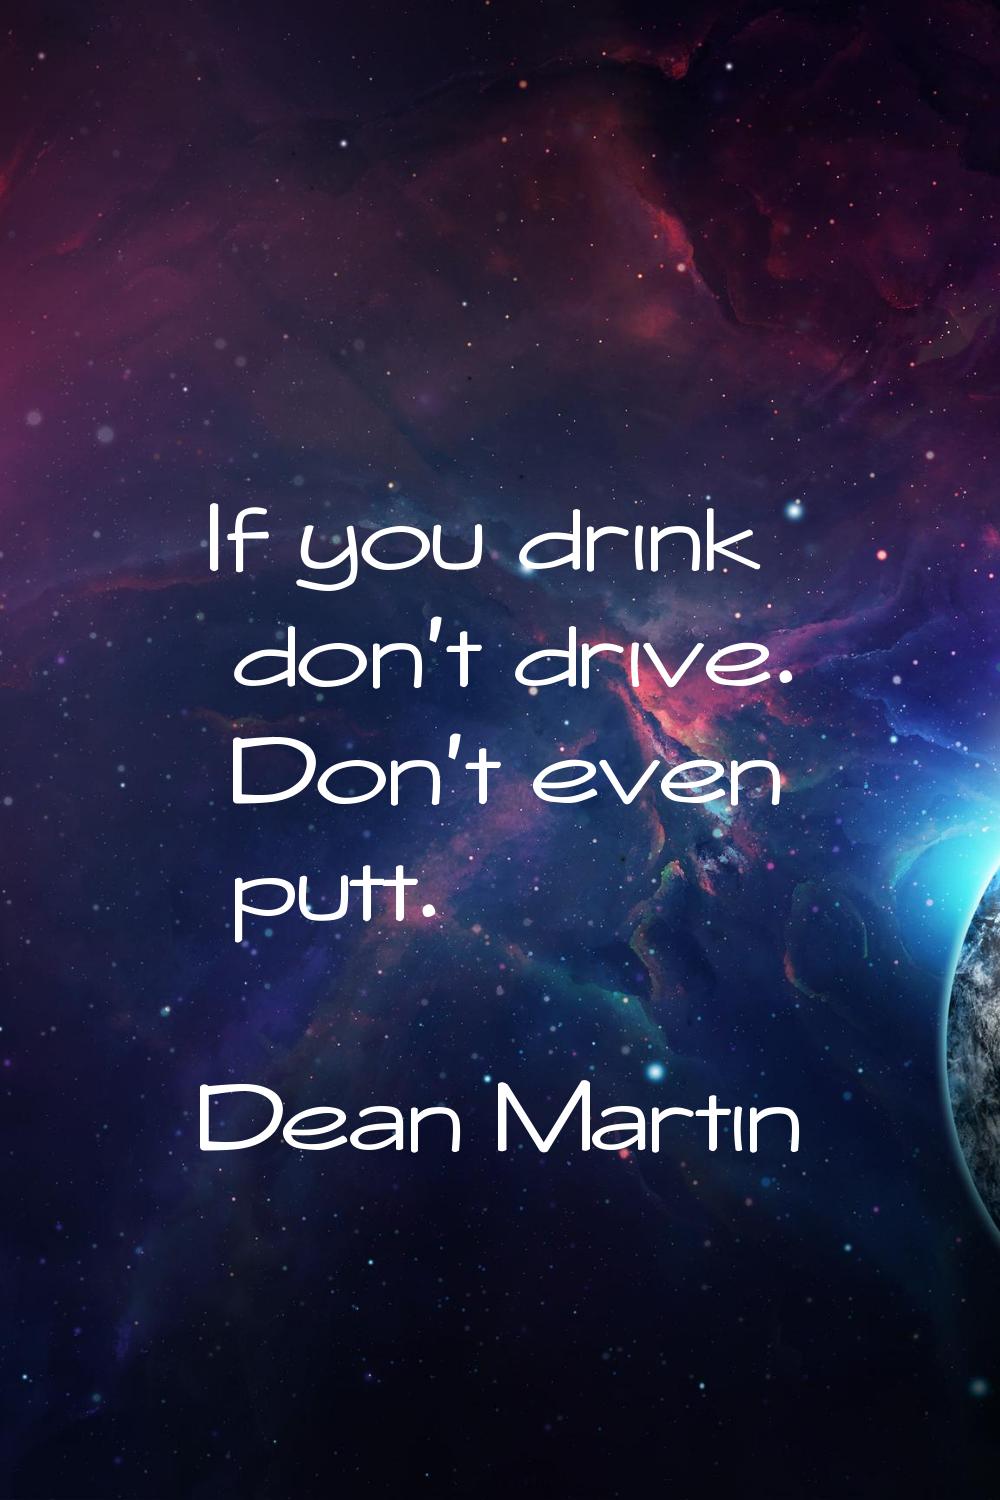 If you drink don't drive. Don't even putt.